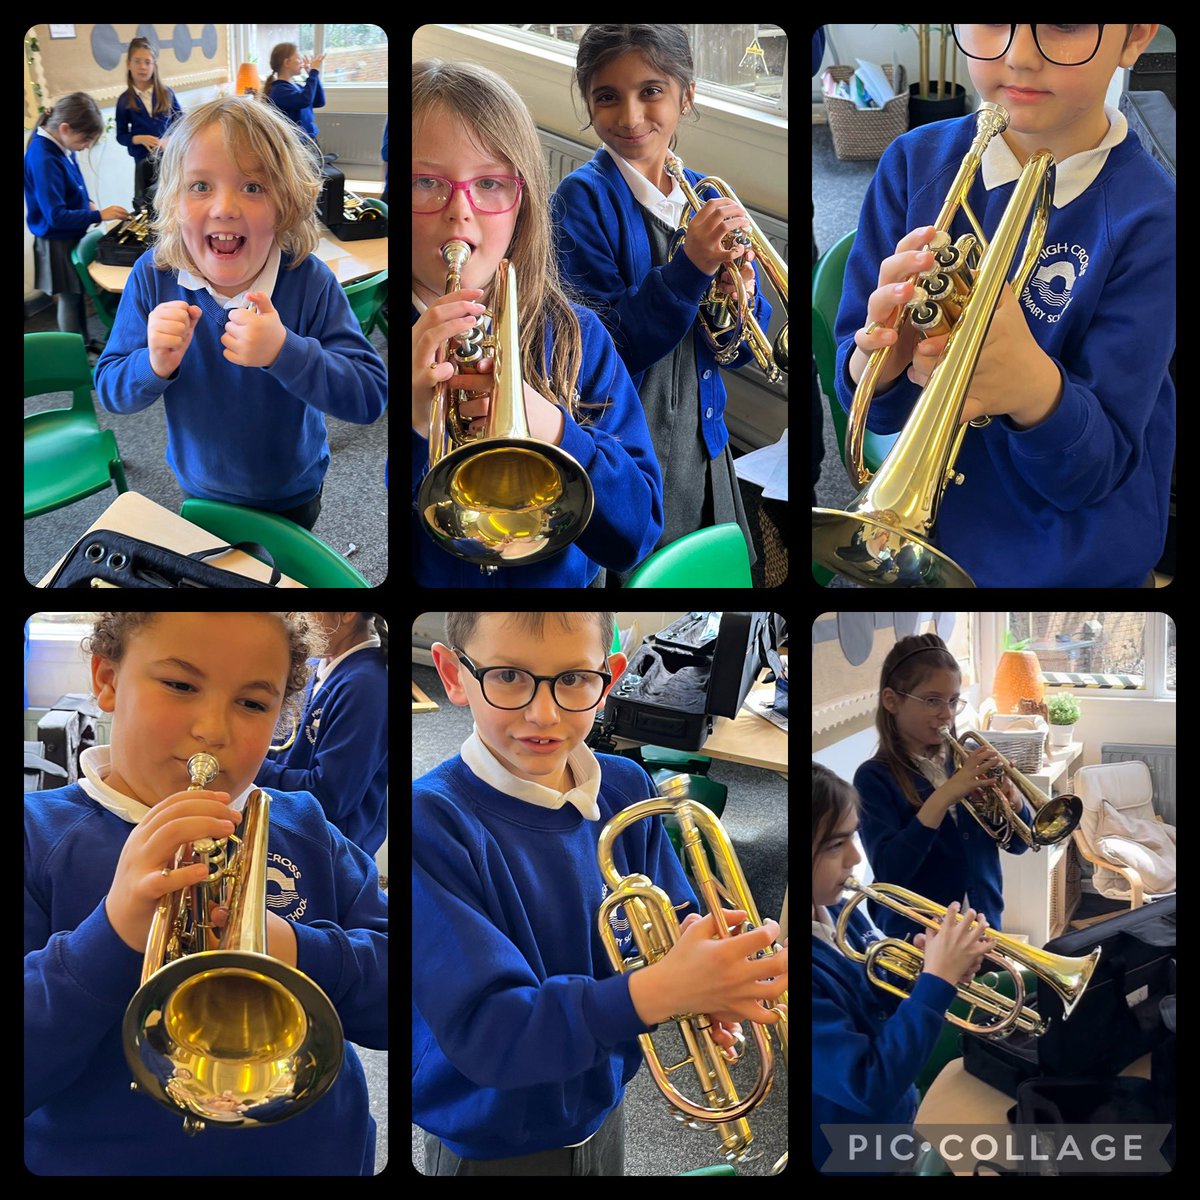 #HCPSY3 started a new musical adventure today when @gwentmusic arrived with 30 cornets! So much fun! We cannot wait until next week’s session 🎶